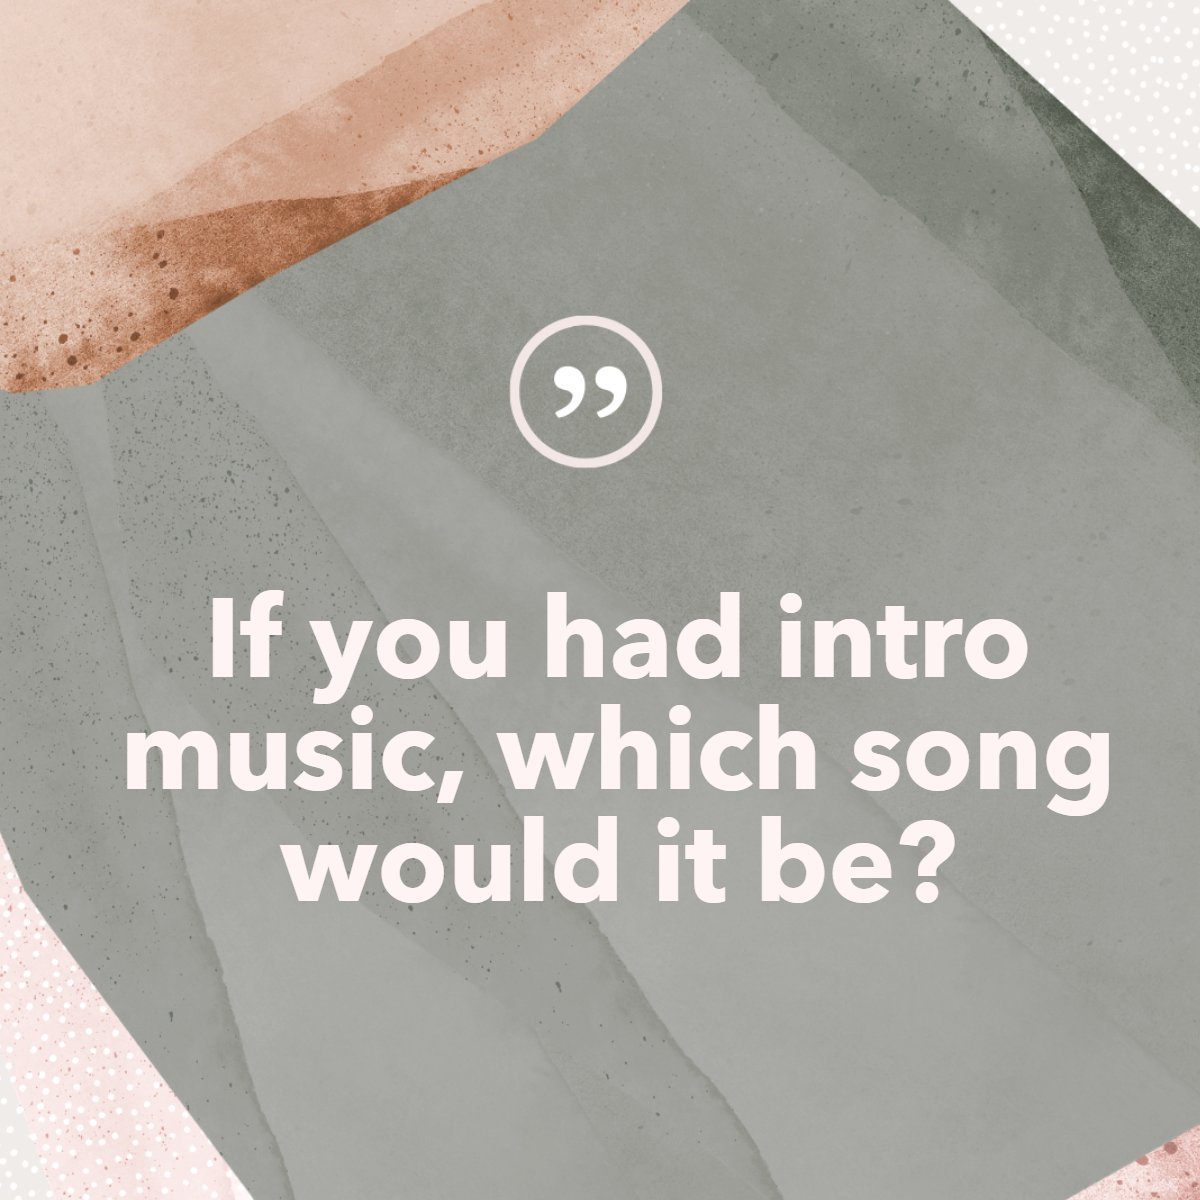 We're thinking: 'We are the Champions.' 🎶 What would yours be? Tell us in the comments! 📷 #intromusic #music #lifestyle #life #question #engagement #tampabayrealtor #SevenOakshomes #Wesleychapelhomes #Wesleychapelrealtor #tampabayrealeastate